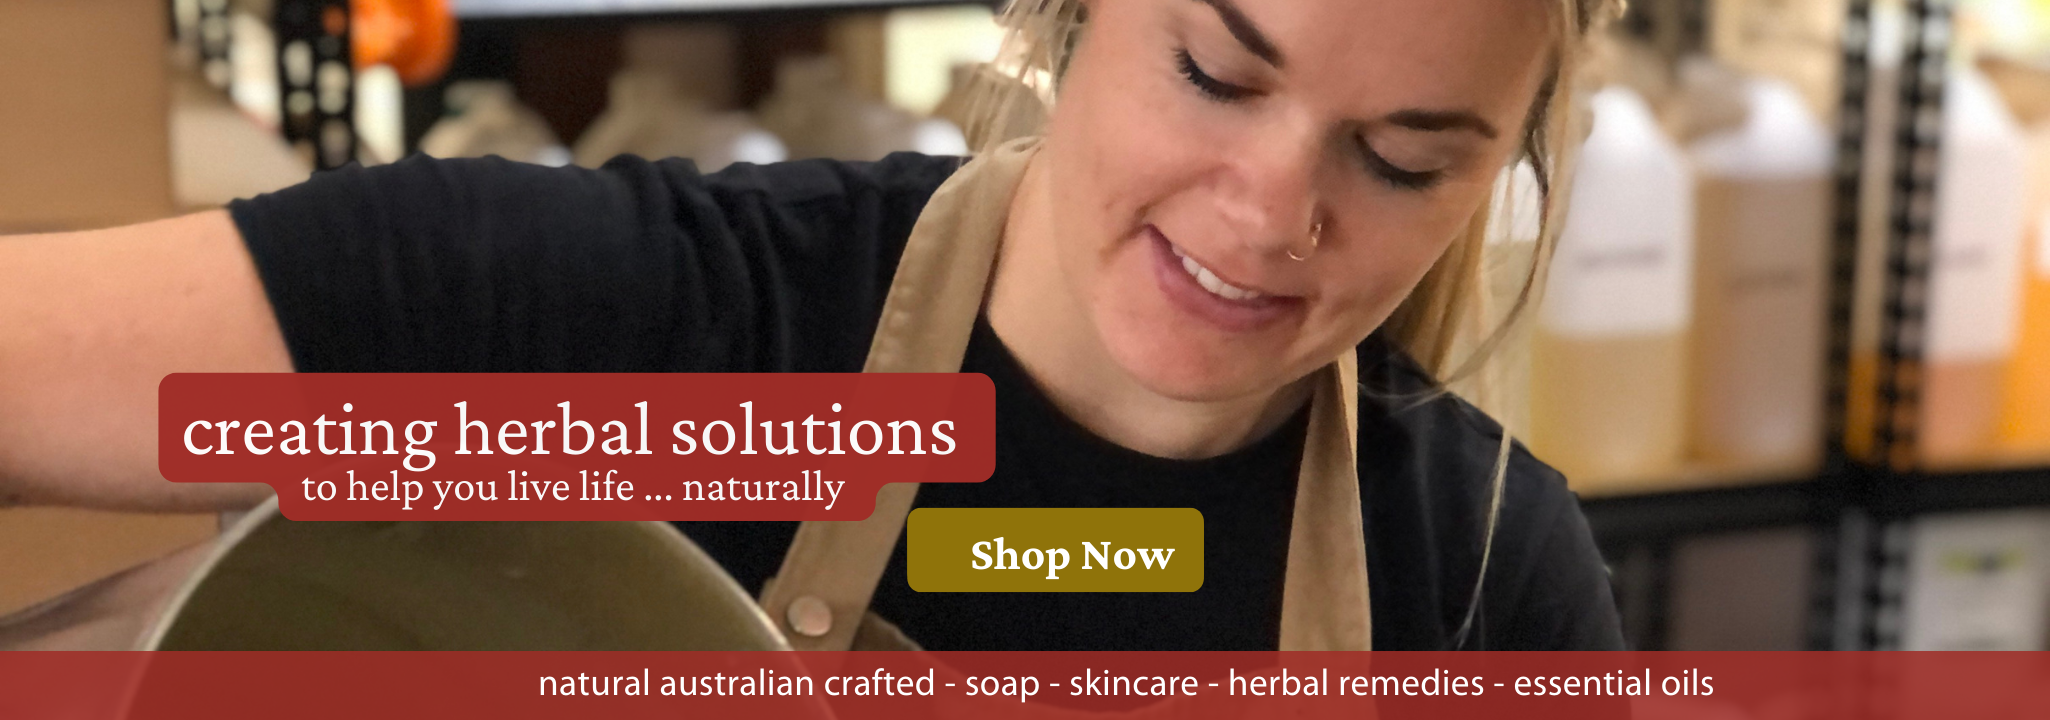 Moon Haven Creating herbal solutions - live life naturally